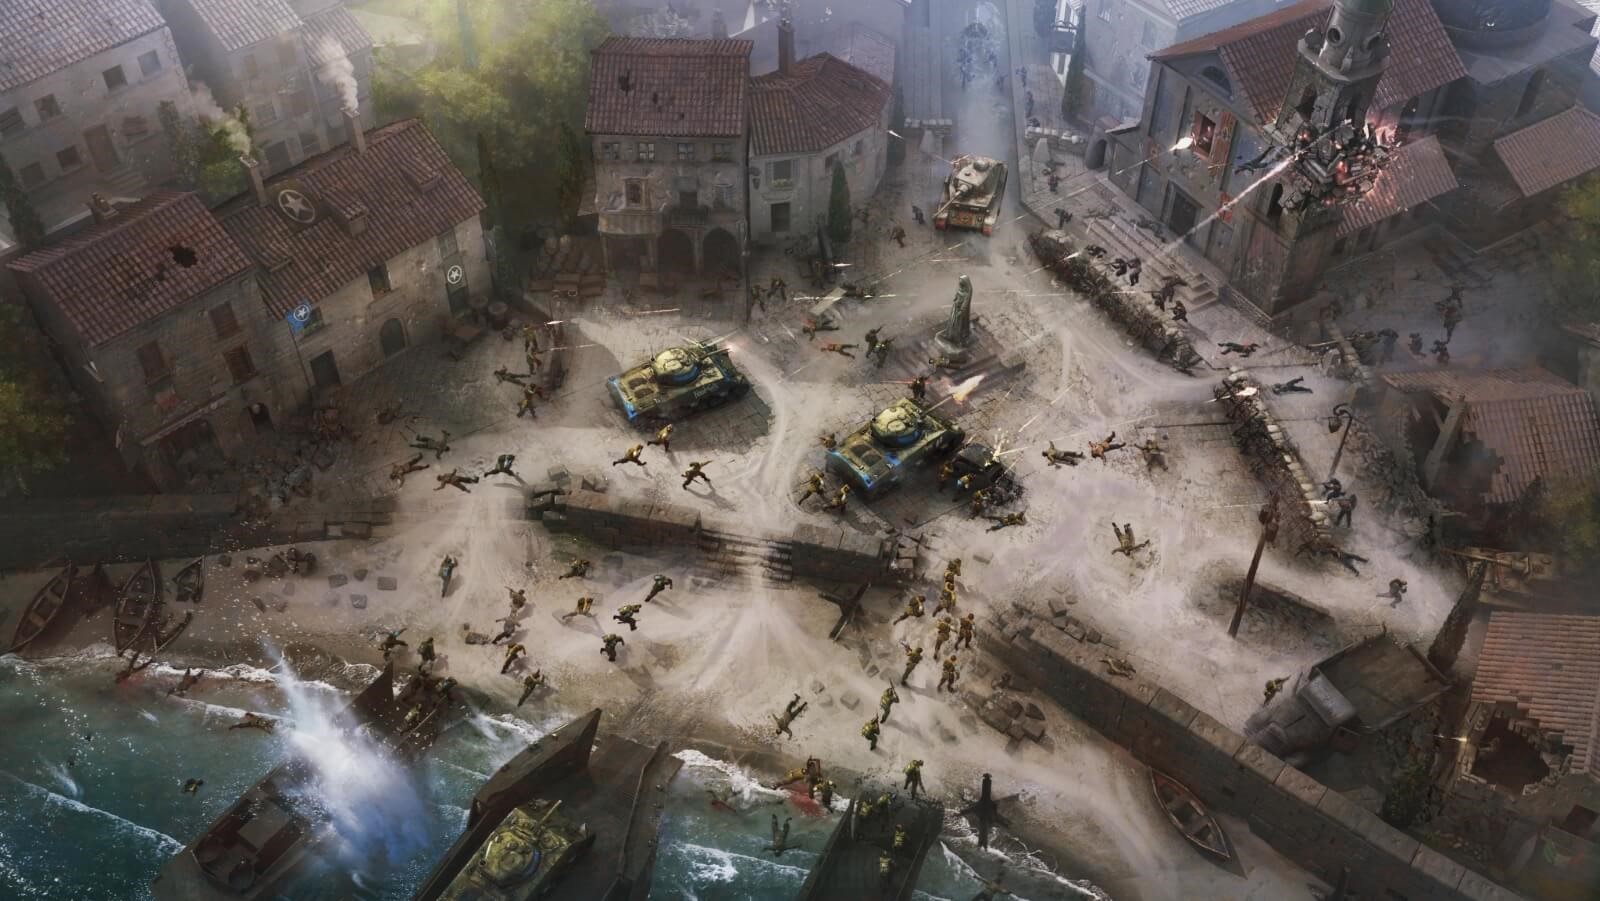 Illustration of combat from bird's eye perspective. Tanks in the middle of a square fire back at soldiers in the buildings surrounding them. Boats deliver soldiers to support the tanks.